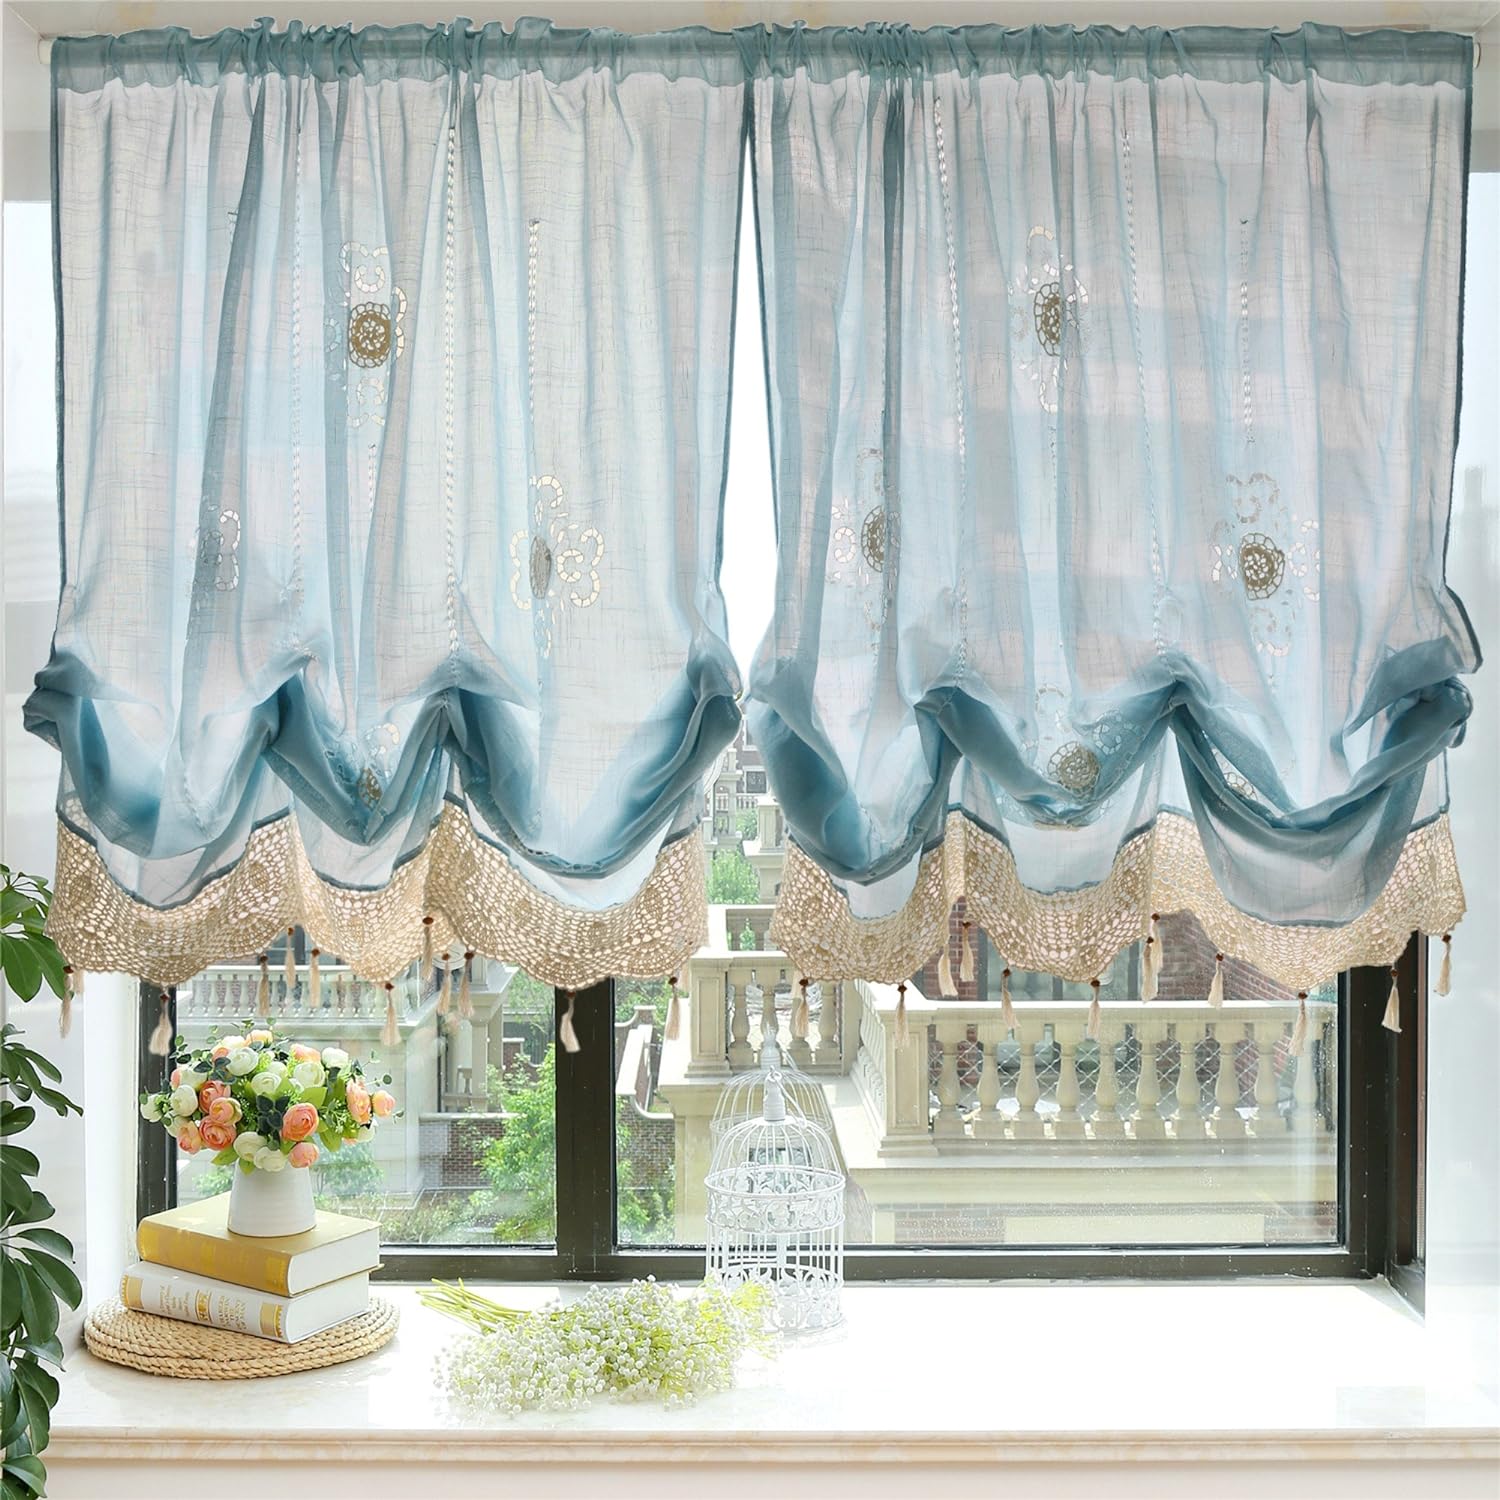 FADFAY Pastoral 57-Inch-by-69-Inch Adjustable Balloon Manual Hook Flower Shade Curtain, Light Blue, 1 Panel